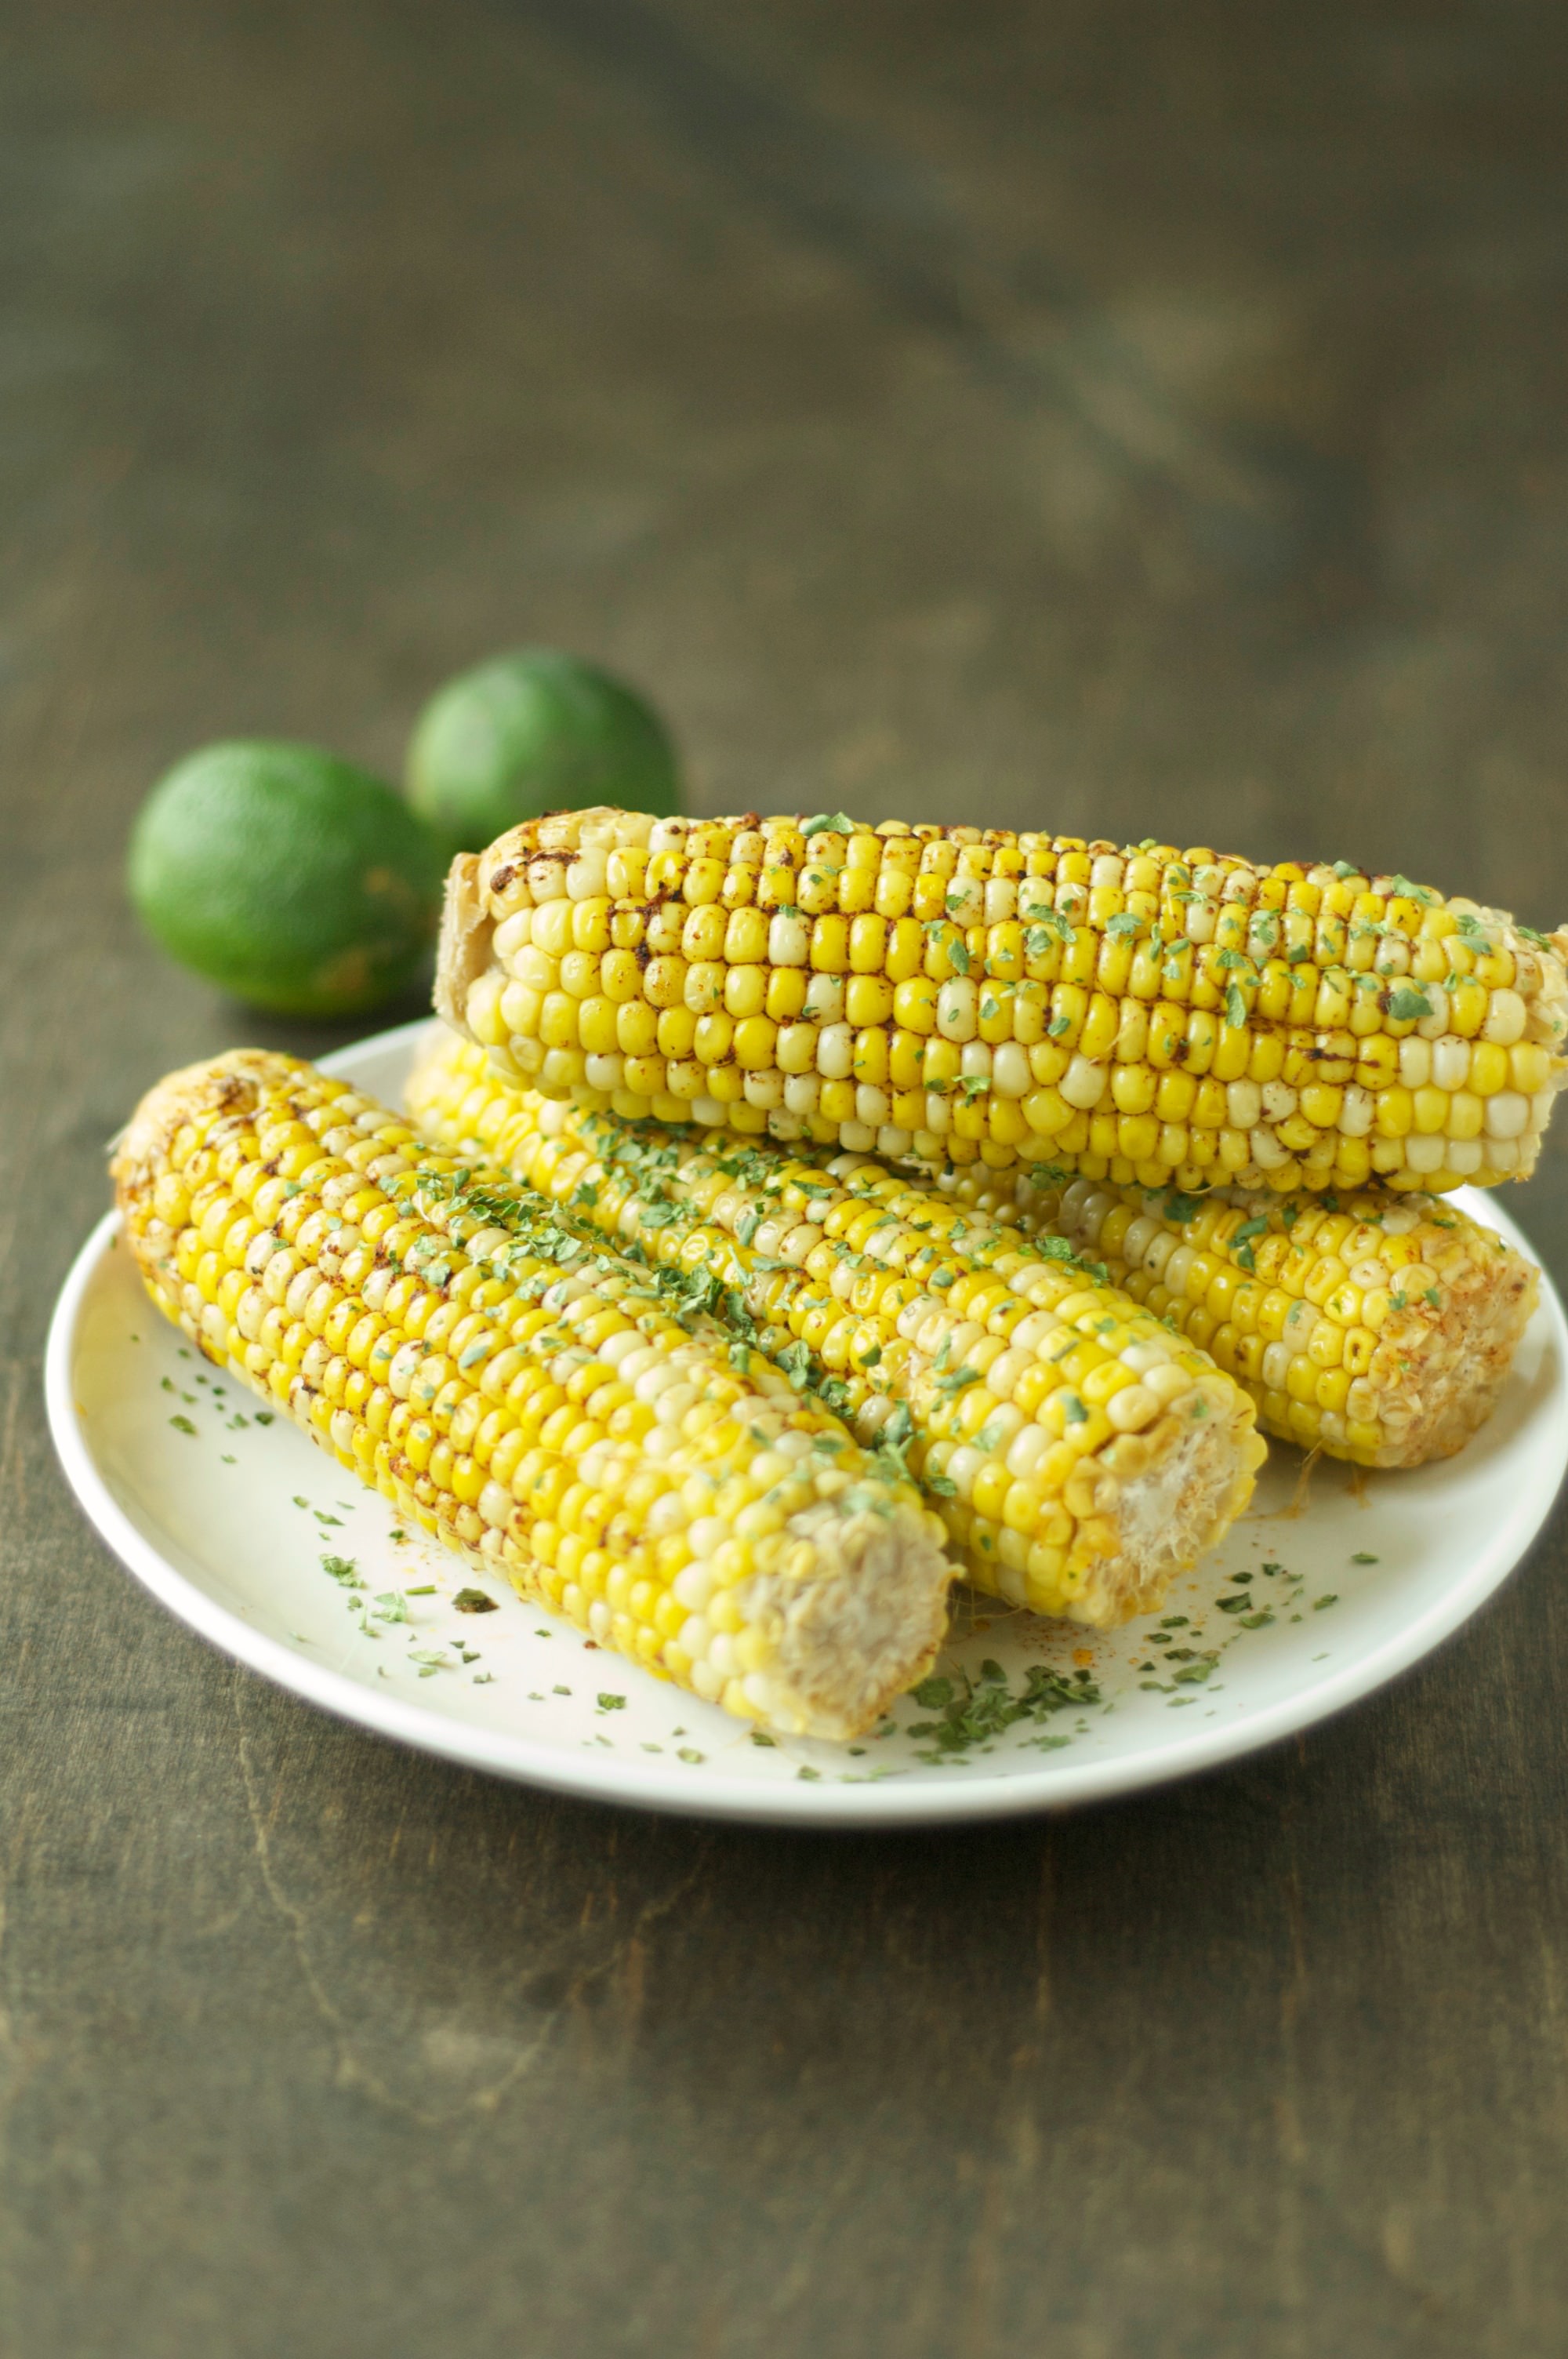 four pieces of corn on the cob on white plate